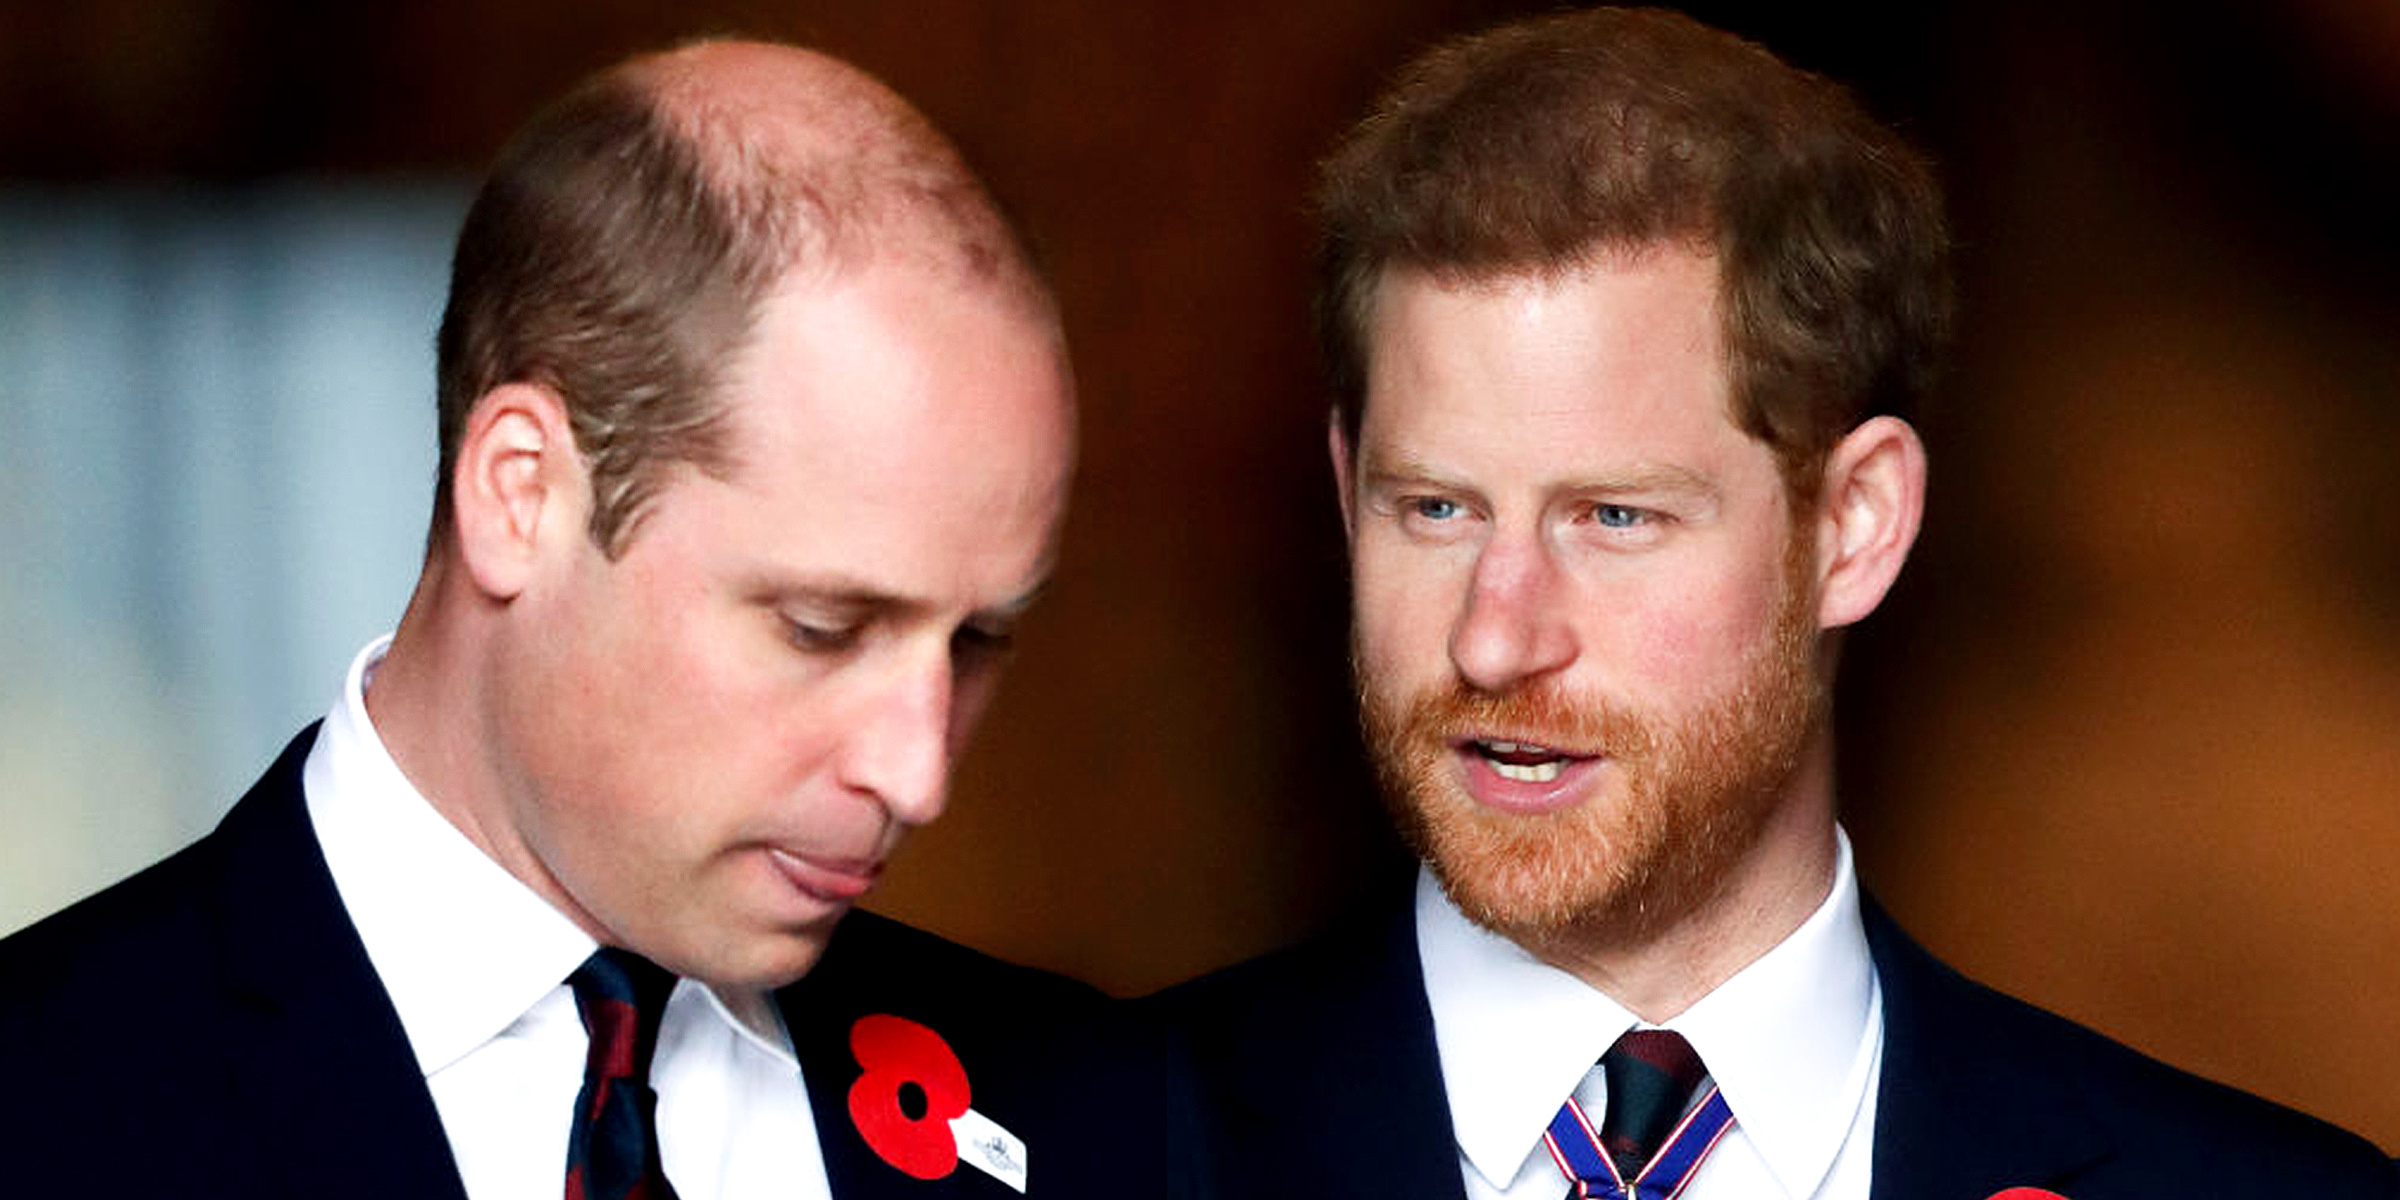 Prince William and Prince Harry | Source: Getty Images